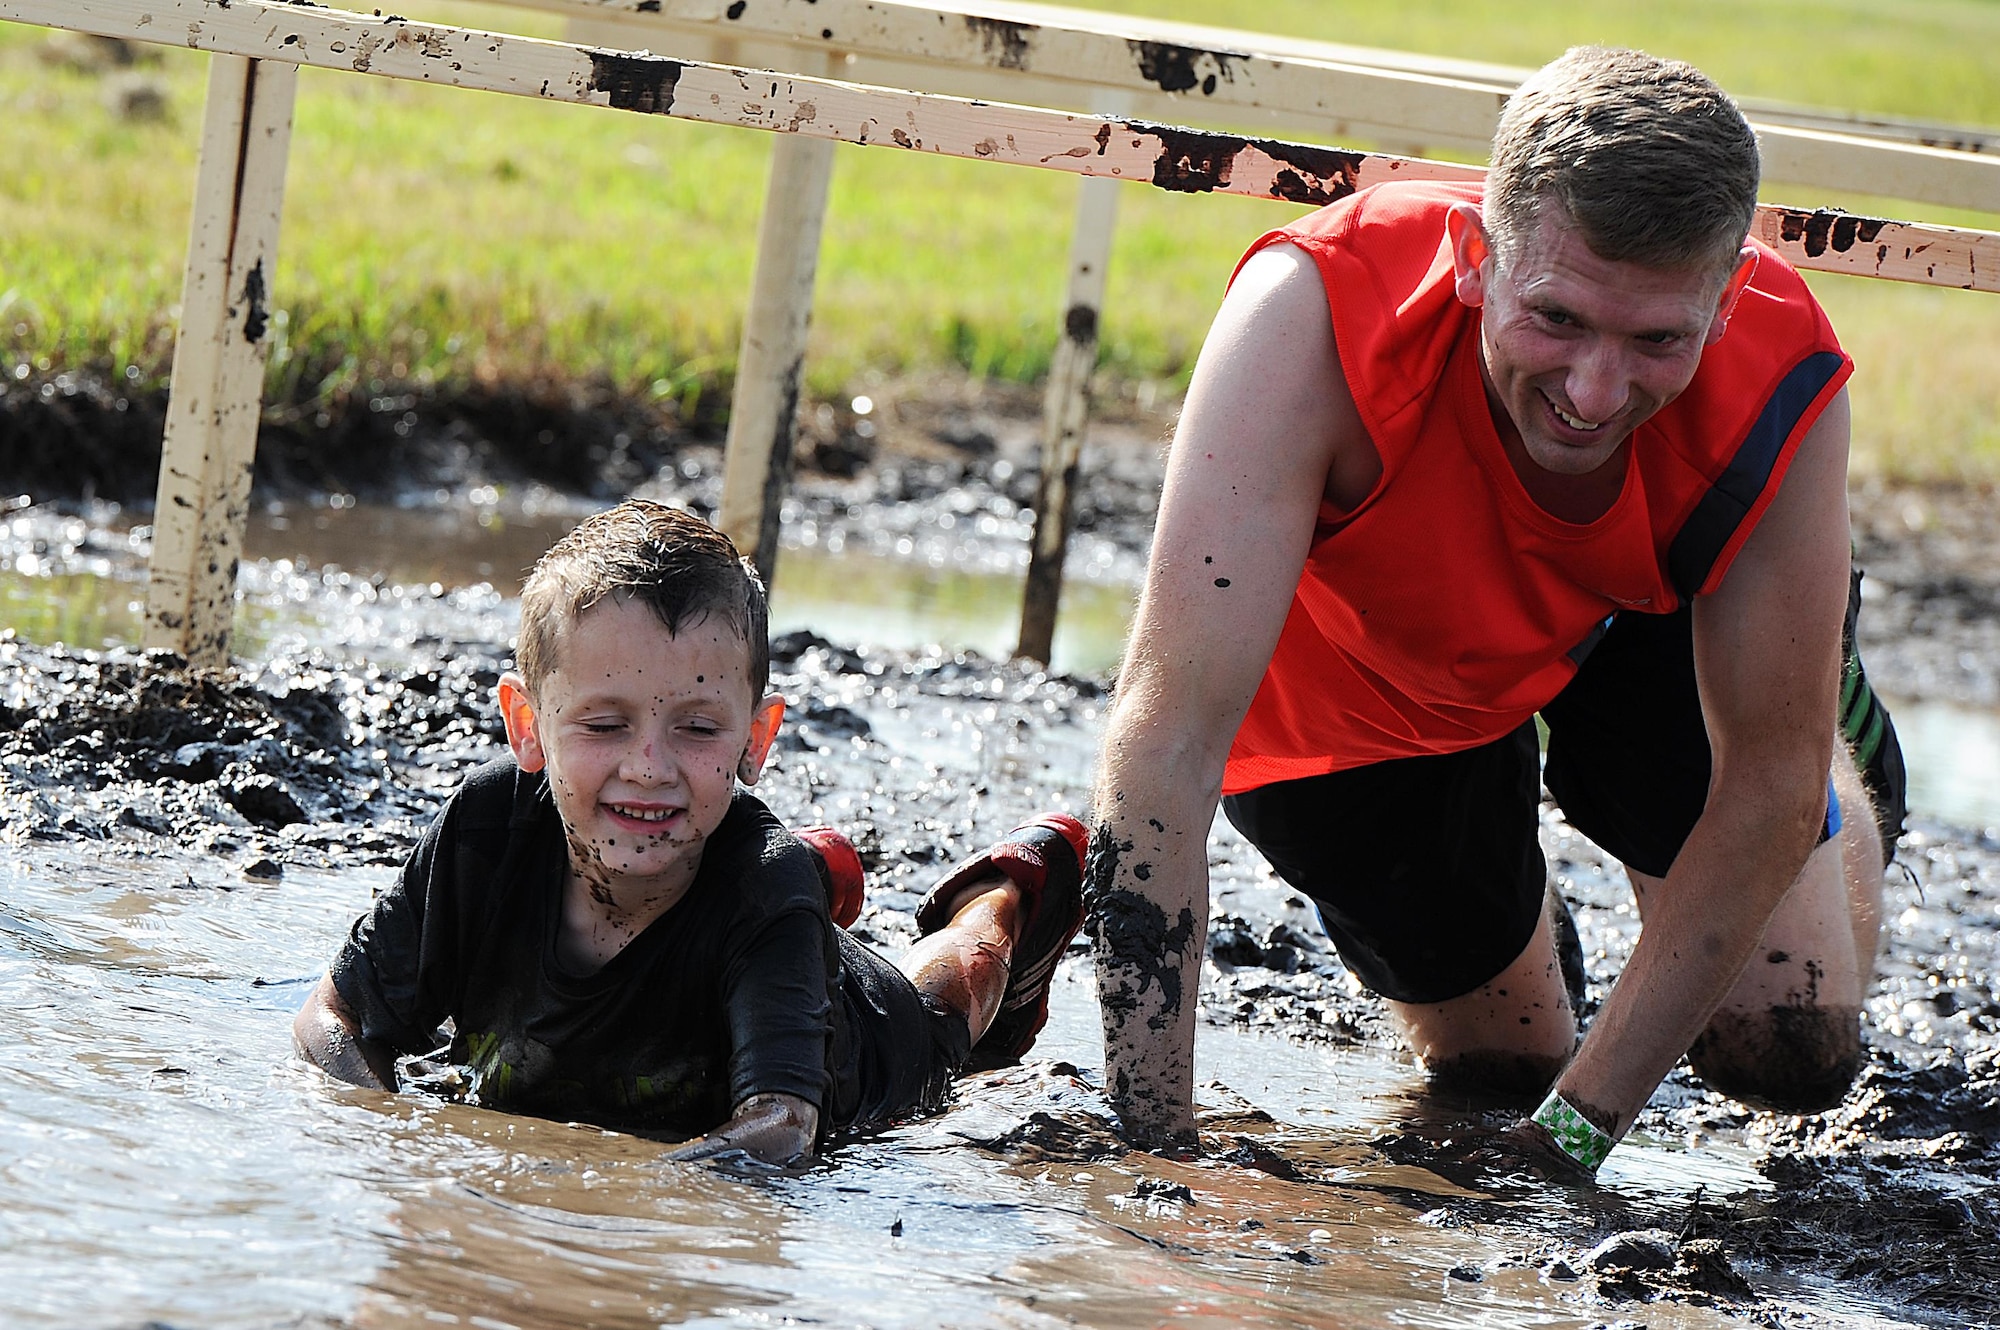 An Airman and his son crawl through the mud during the 2016 Mini Mudder, July 15, 2016 at Minot Air Force Base, N.D. Approximately 900 Airmen and their families attend the event, which lasted 2 hours. (U.S. Air Force photo/Senior Airman Kristoffer Kaubisch)